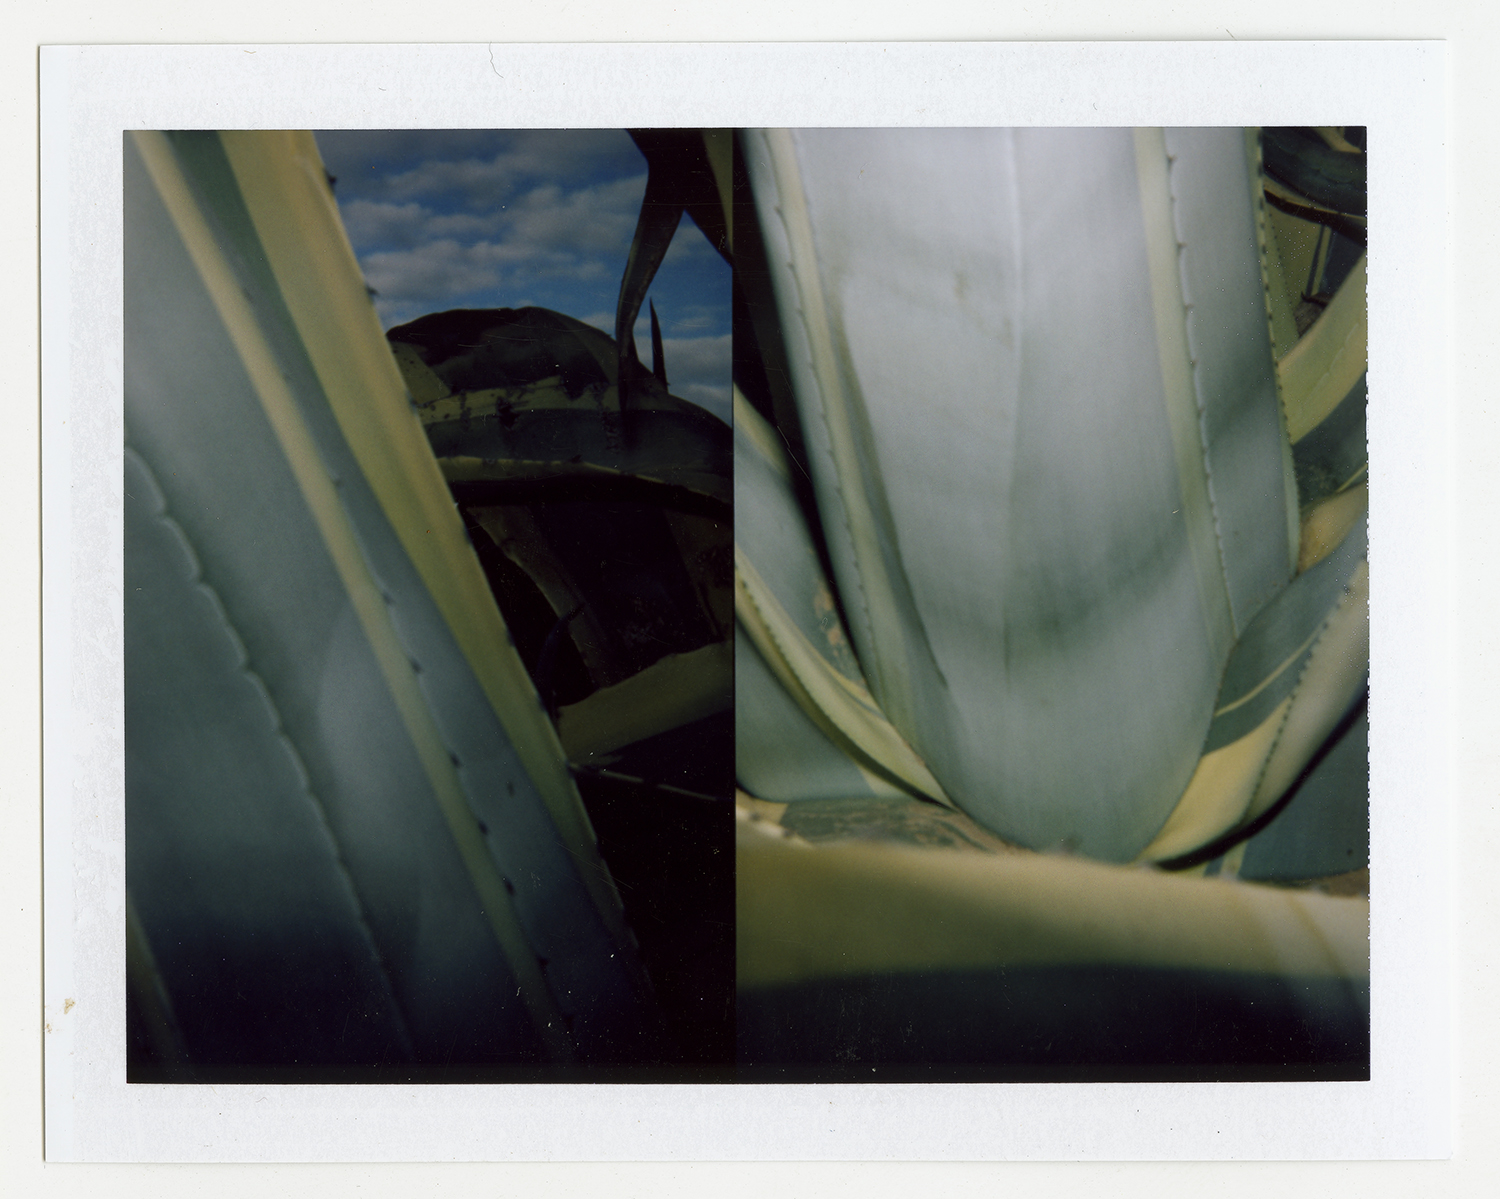  I.D.057, The Polaroid Revolutionary Workers, 2013, Polaroid Picture, 107mm x 86mm 